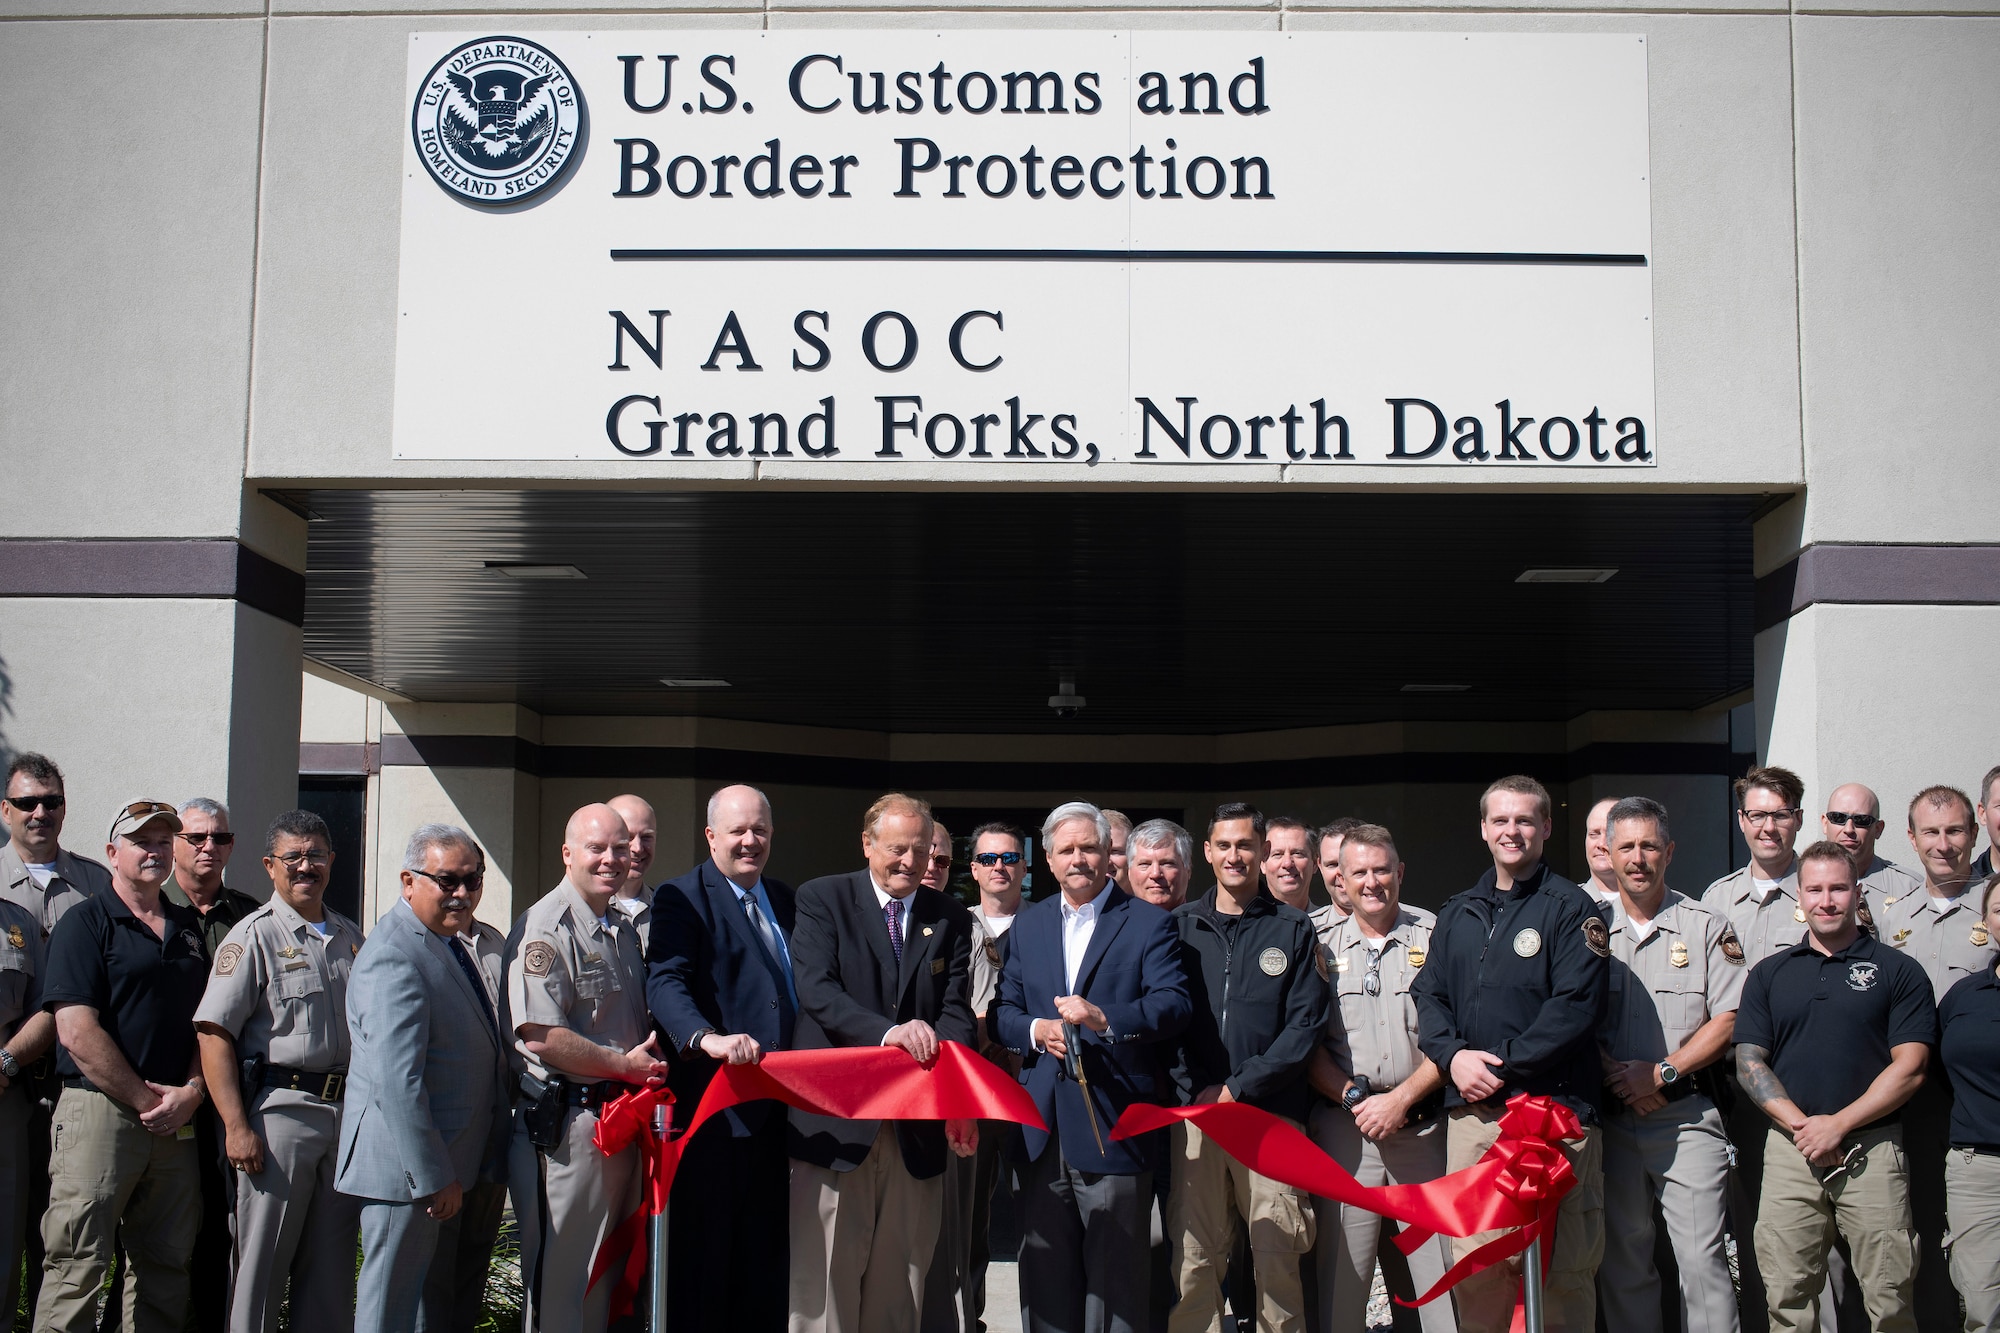 North Dakota Senator John Hoeven officiates the opening of U.S. Customs and Border Protection’s newly-renovated National Air Security Operations Center by cutting a ceremonial ribbon August 28, 2019, on Grand Forks Air Force Base, North Dakota. The NASOC will provide initial and recurrent training for unmanned aerial system pilots with CBP. (U.S. Air Force photo by Senior Airman Elora J. Martinez)